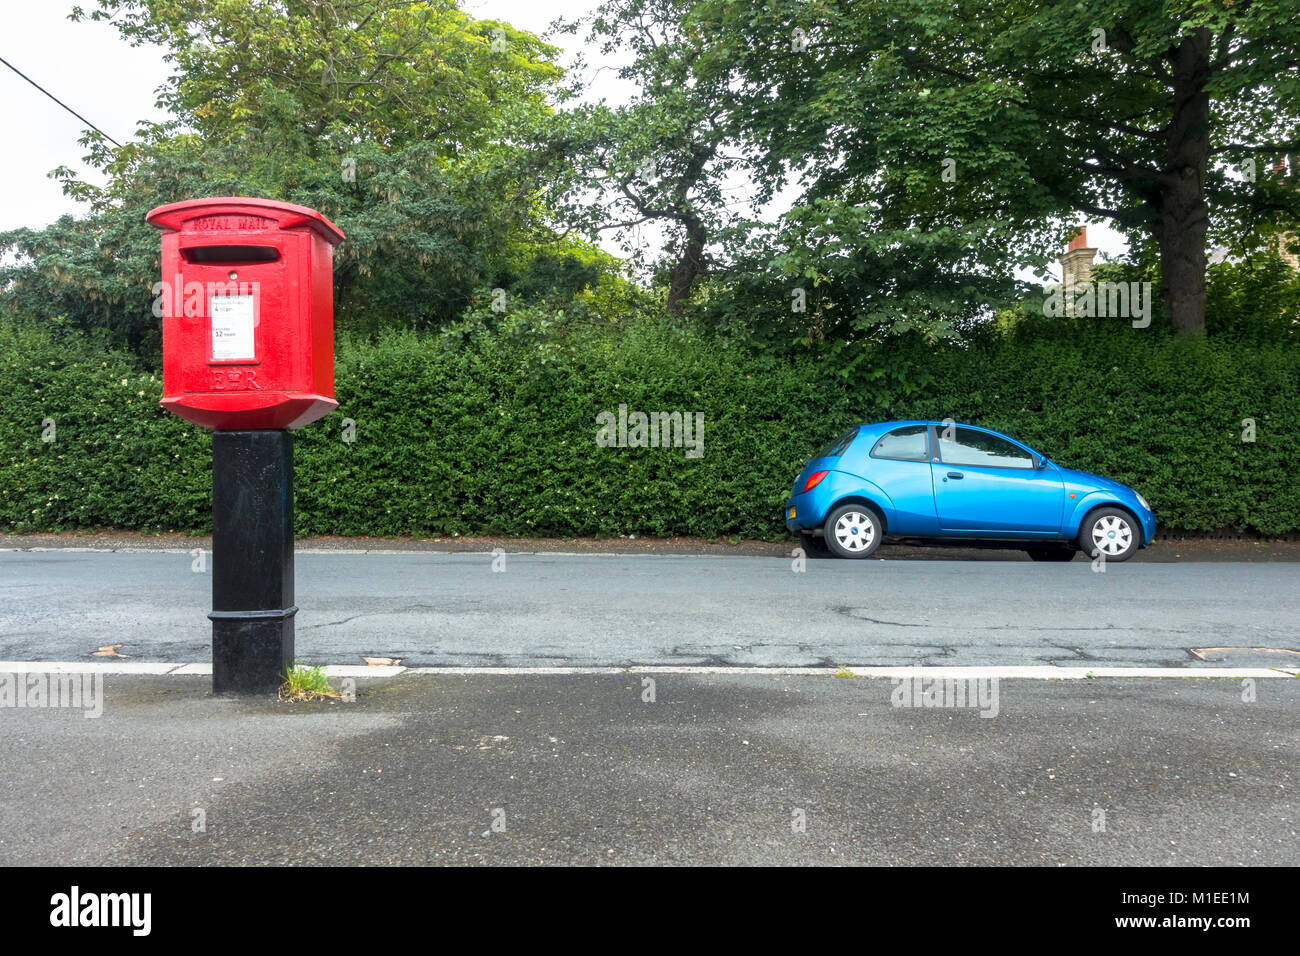 A small blue car opposite a red post box, uk Stock Photo